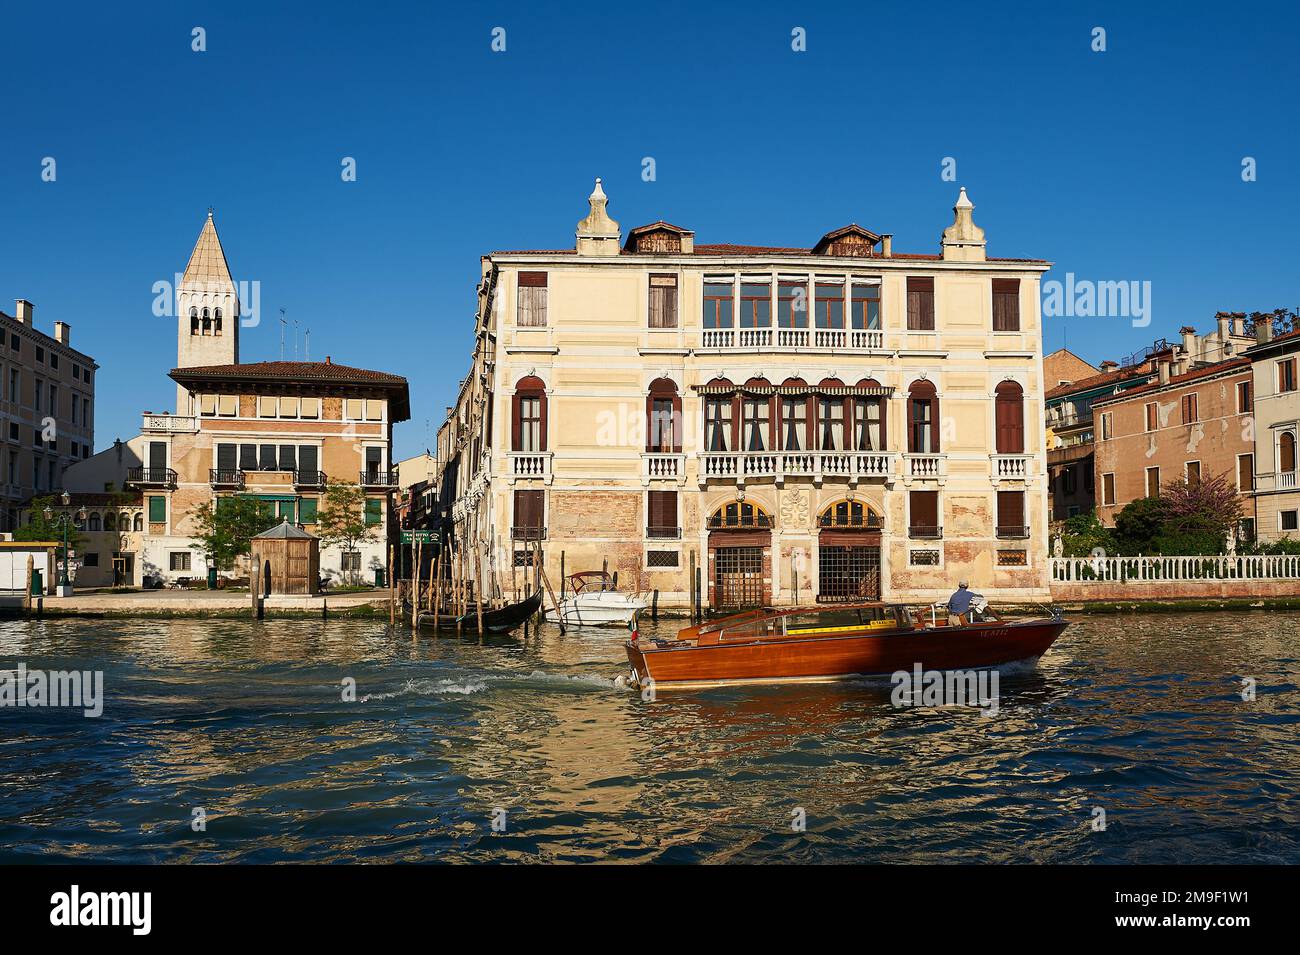 View of a typical taxi water in front of the ancient Venetian facade with its façade damaged by the effect of water and a wooden pier for small boats Stock Photo